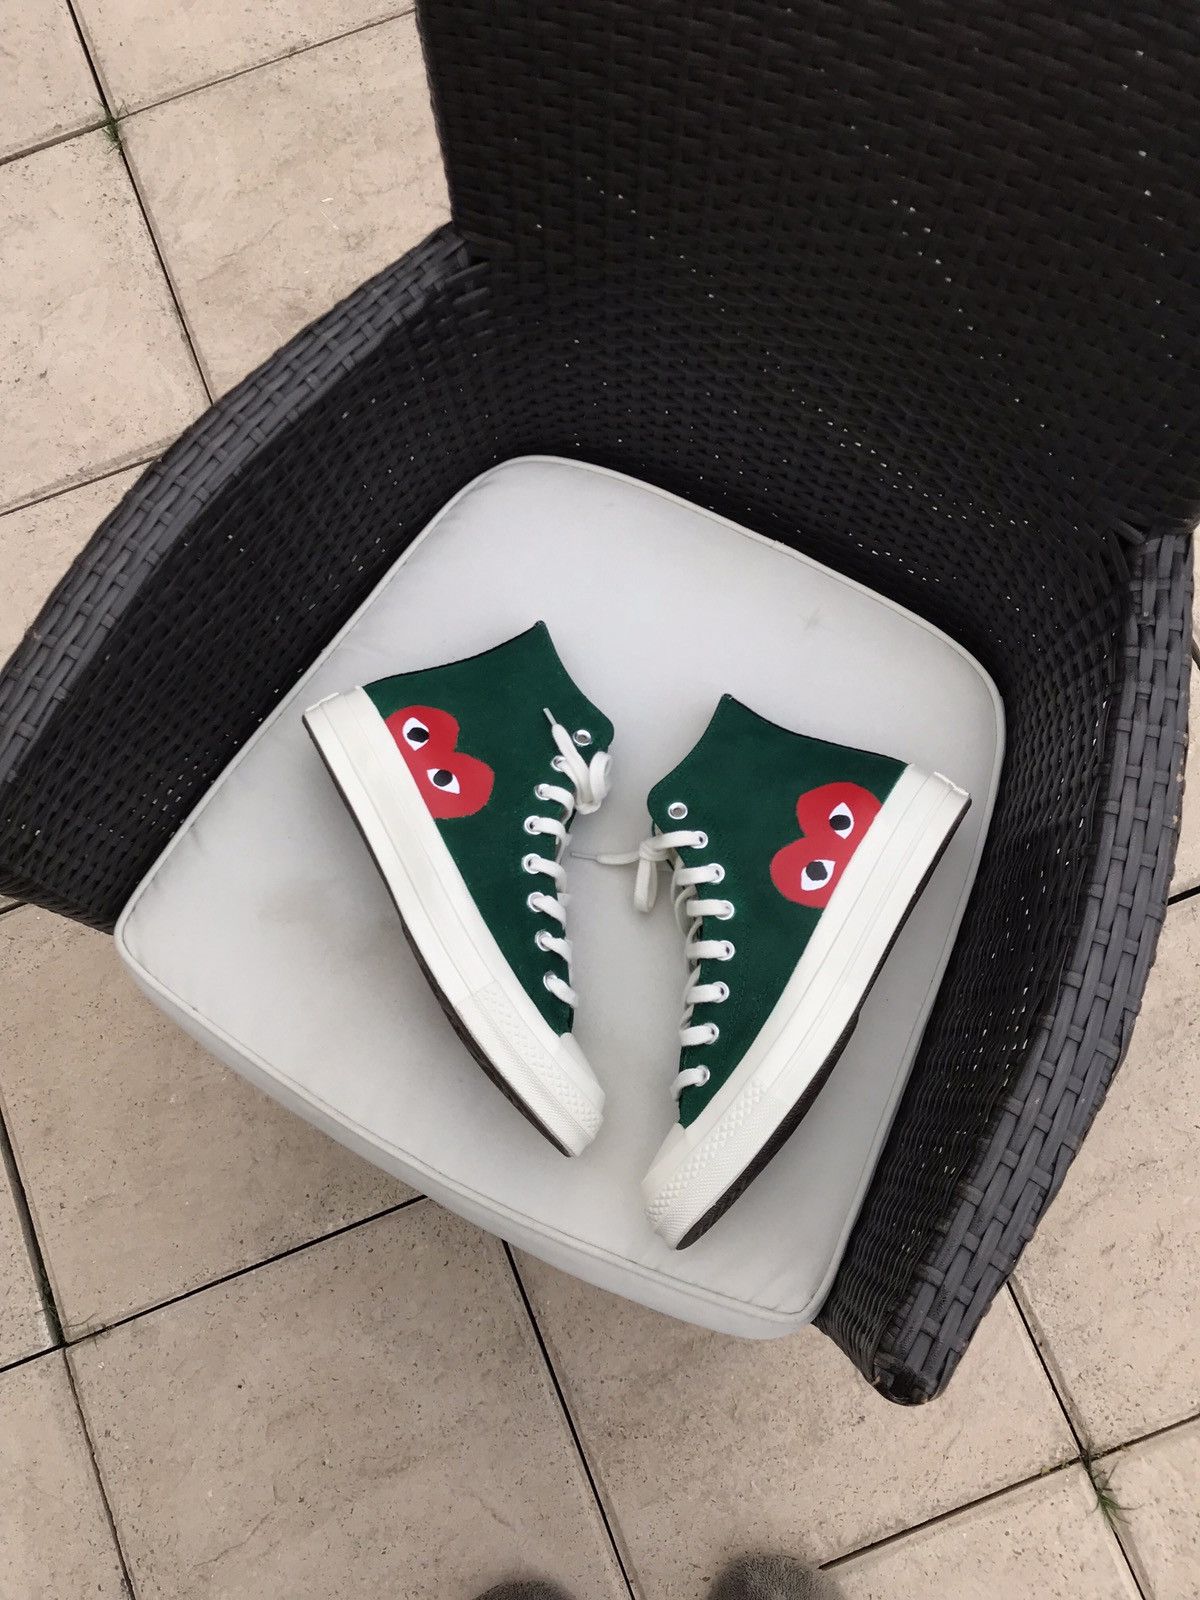 Converse Converse X CDG “Green Forest” | Grailed